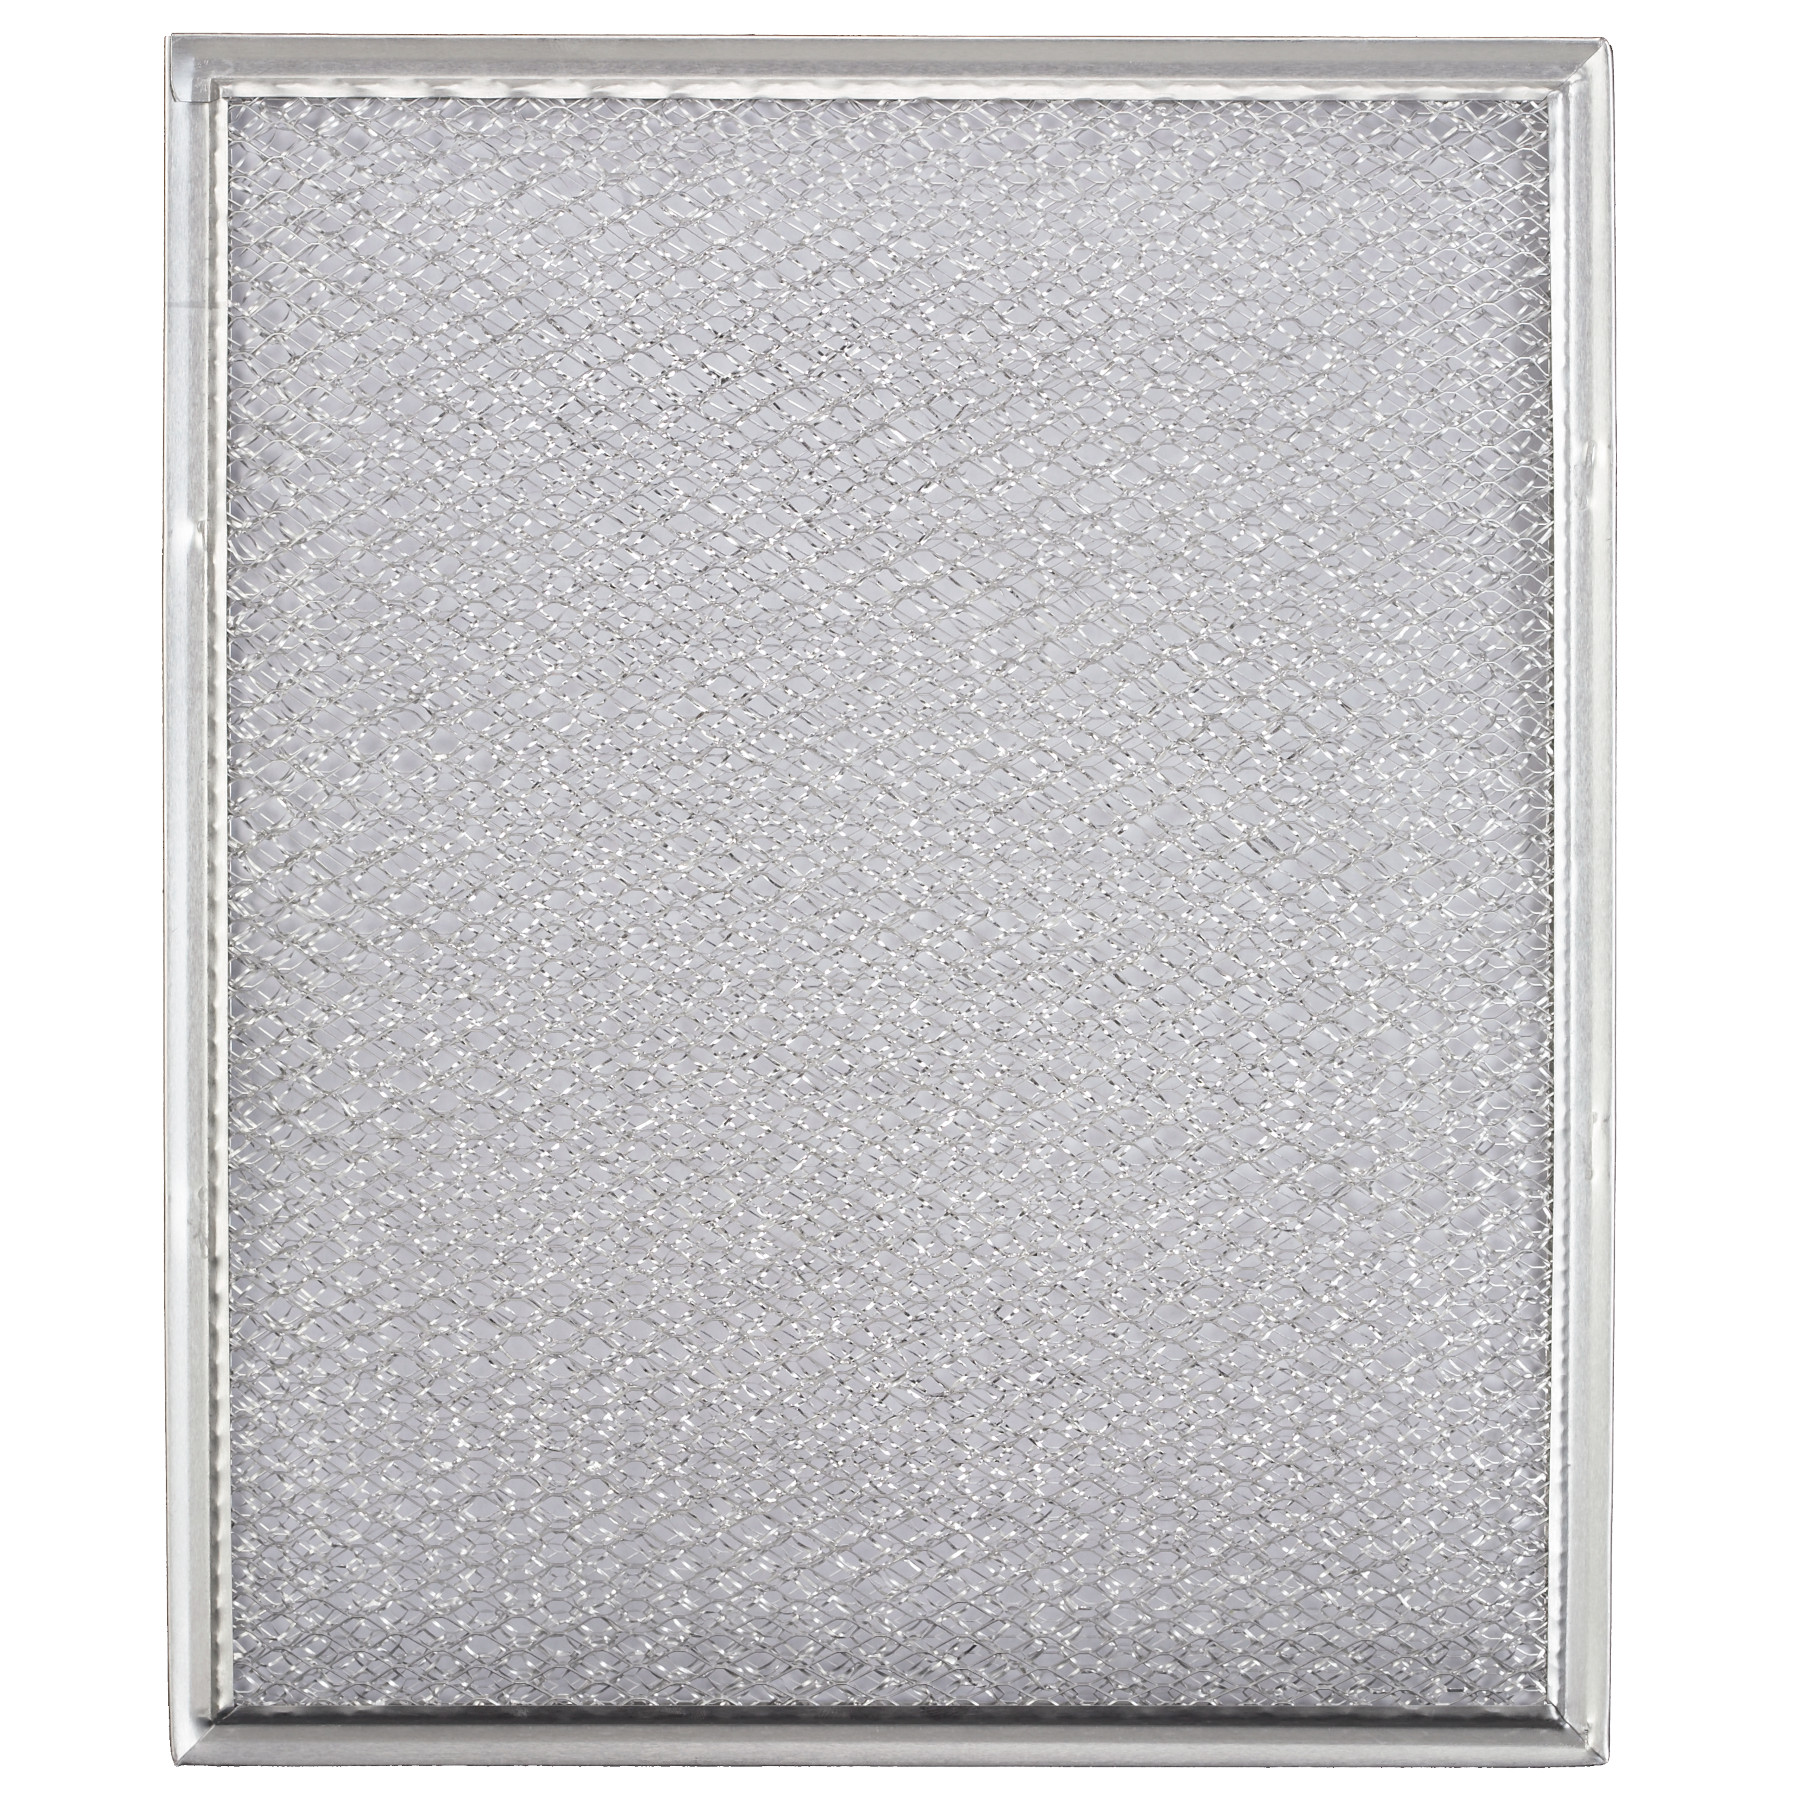 Broan-NuTone® Genuine Replacement Aluminum Filter for Range Hoods, 8-3/4" x 10-1/2", Fits Select Models